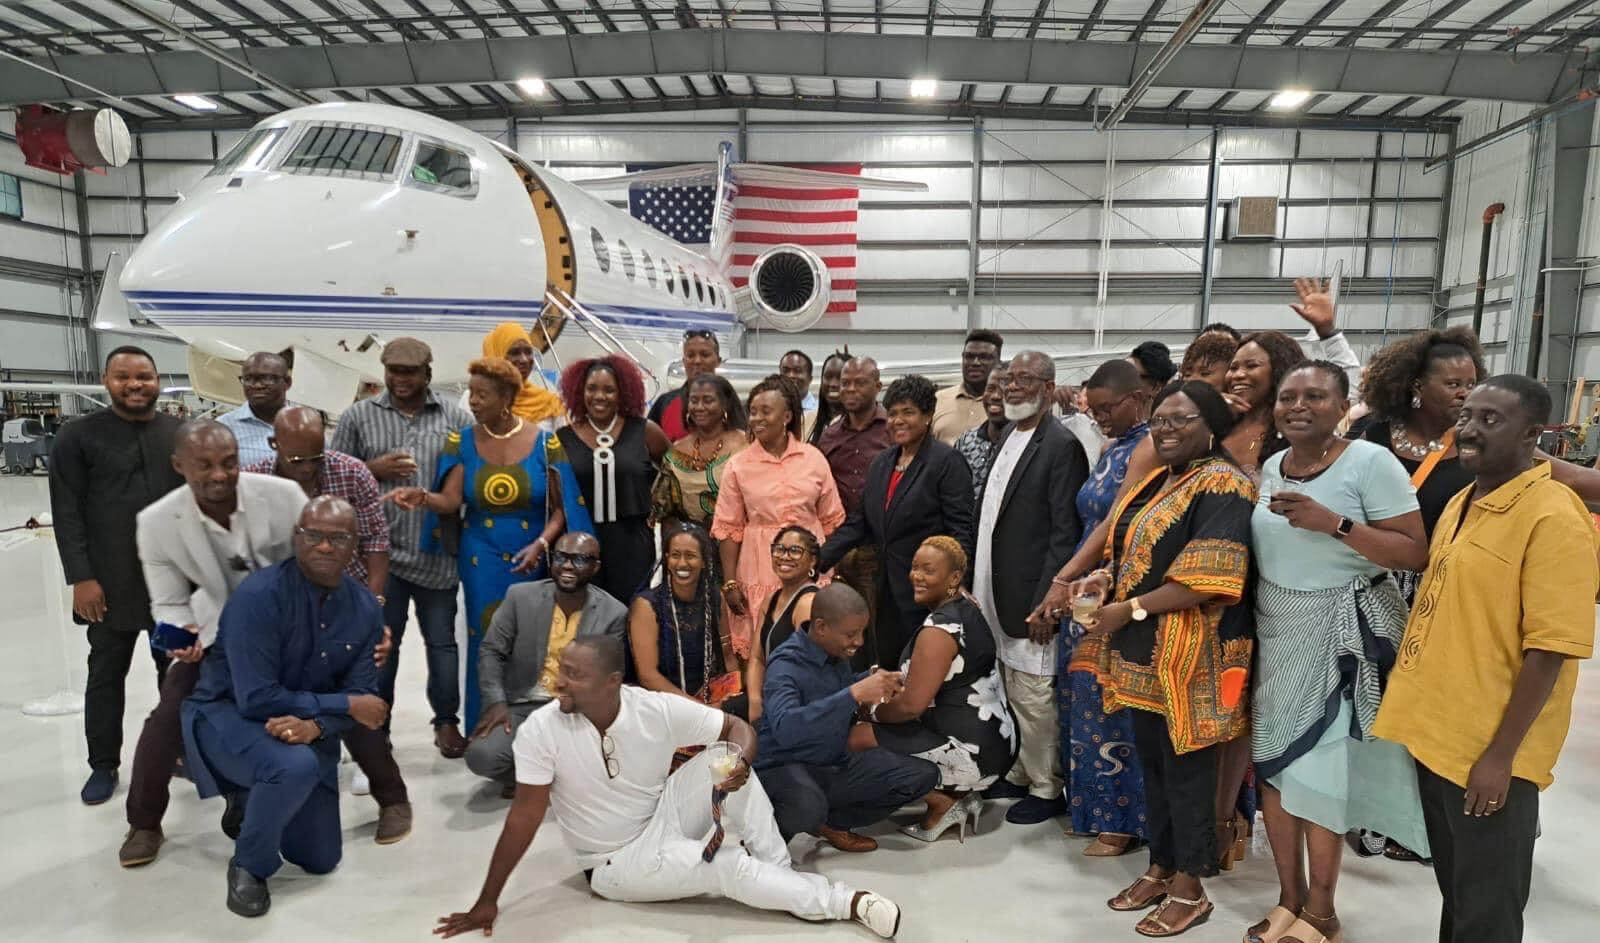 Group of people posing in front of a jet